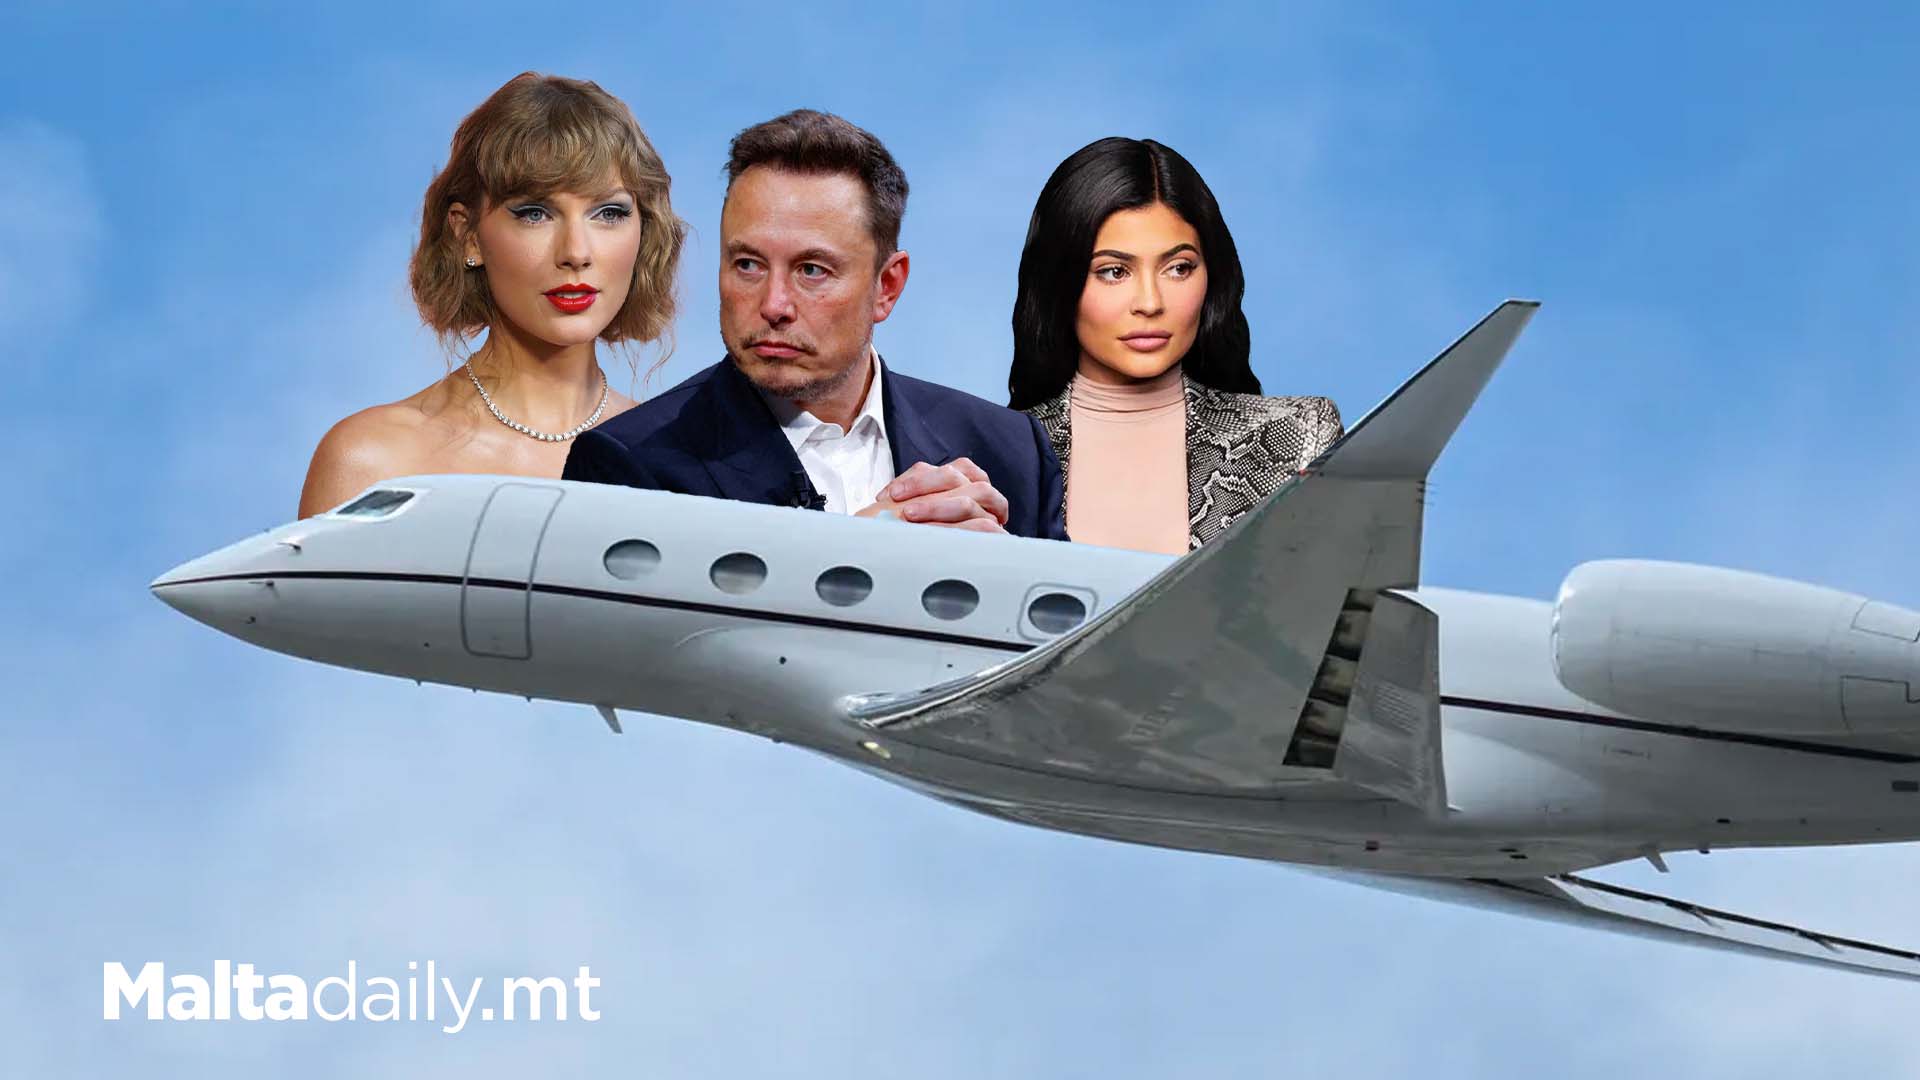 Private Jets Of Celebrities Spent 11 Years In Air As Of 2022